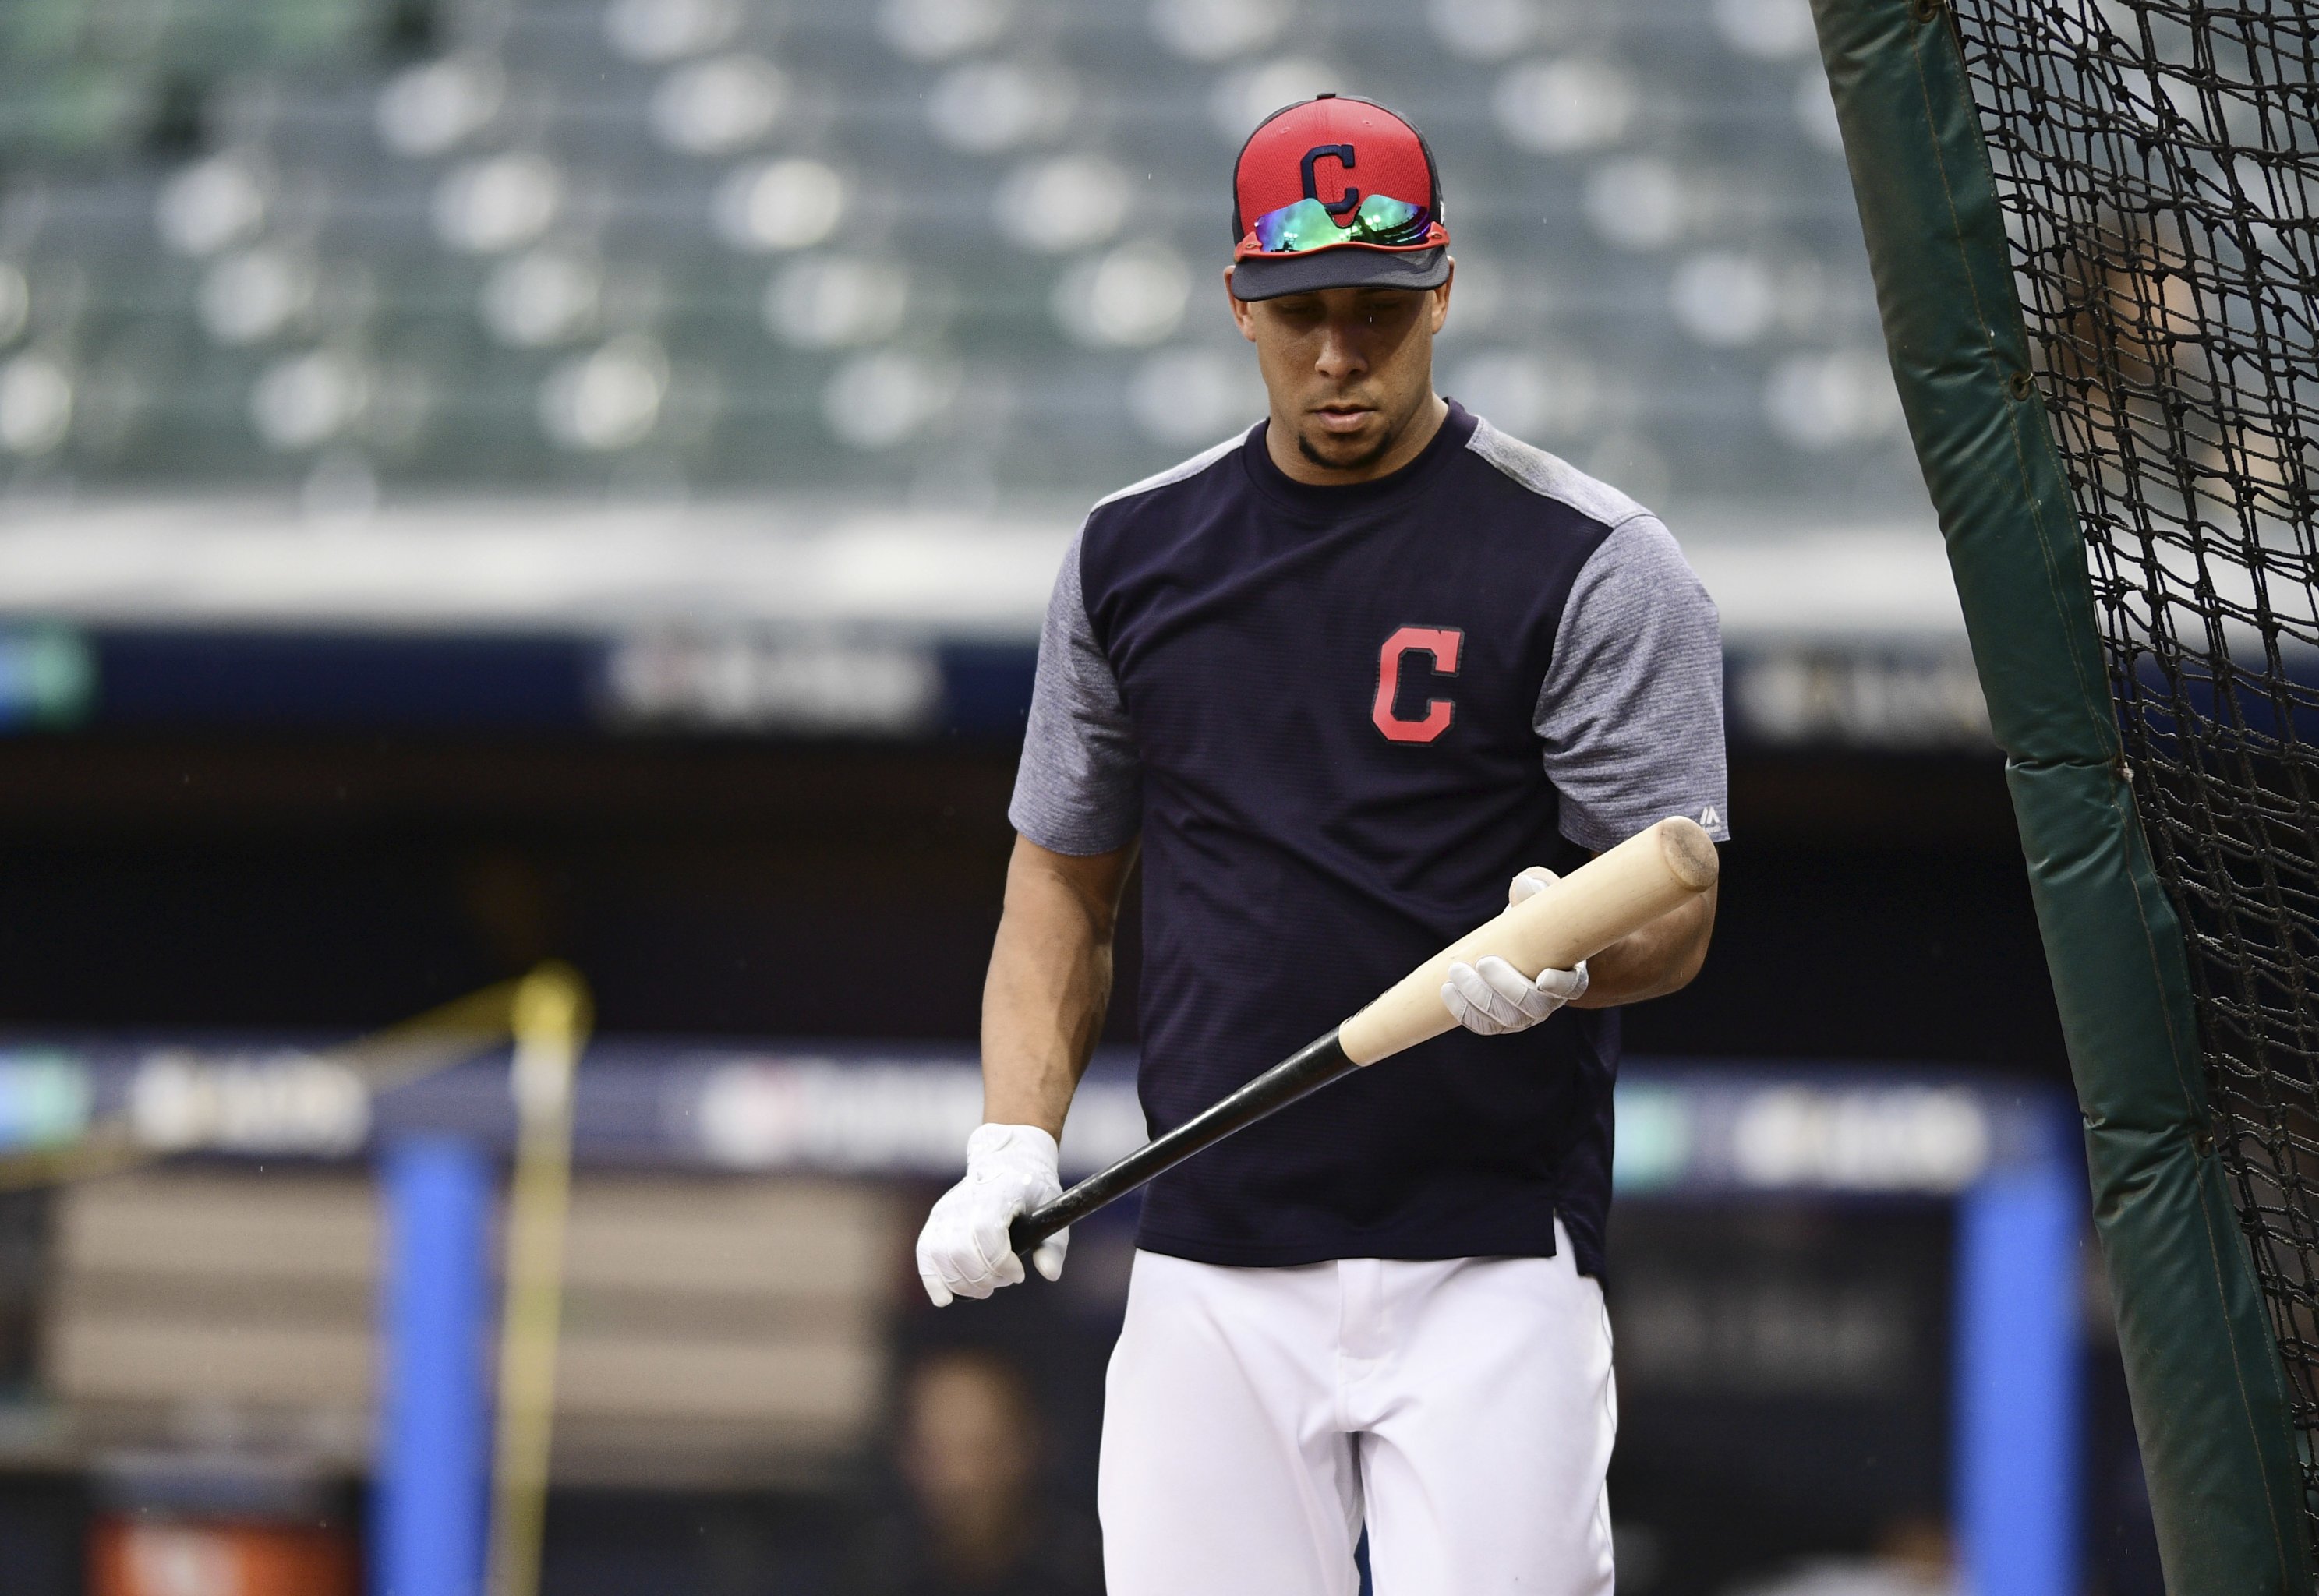 Cleveland Indians outfielder Tyler Naquin quickly shifts gears